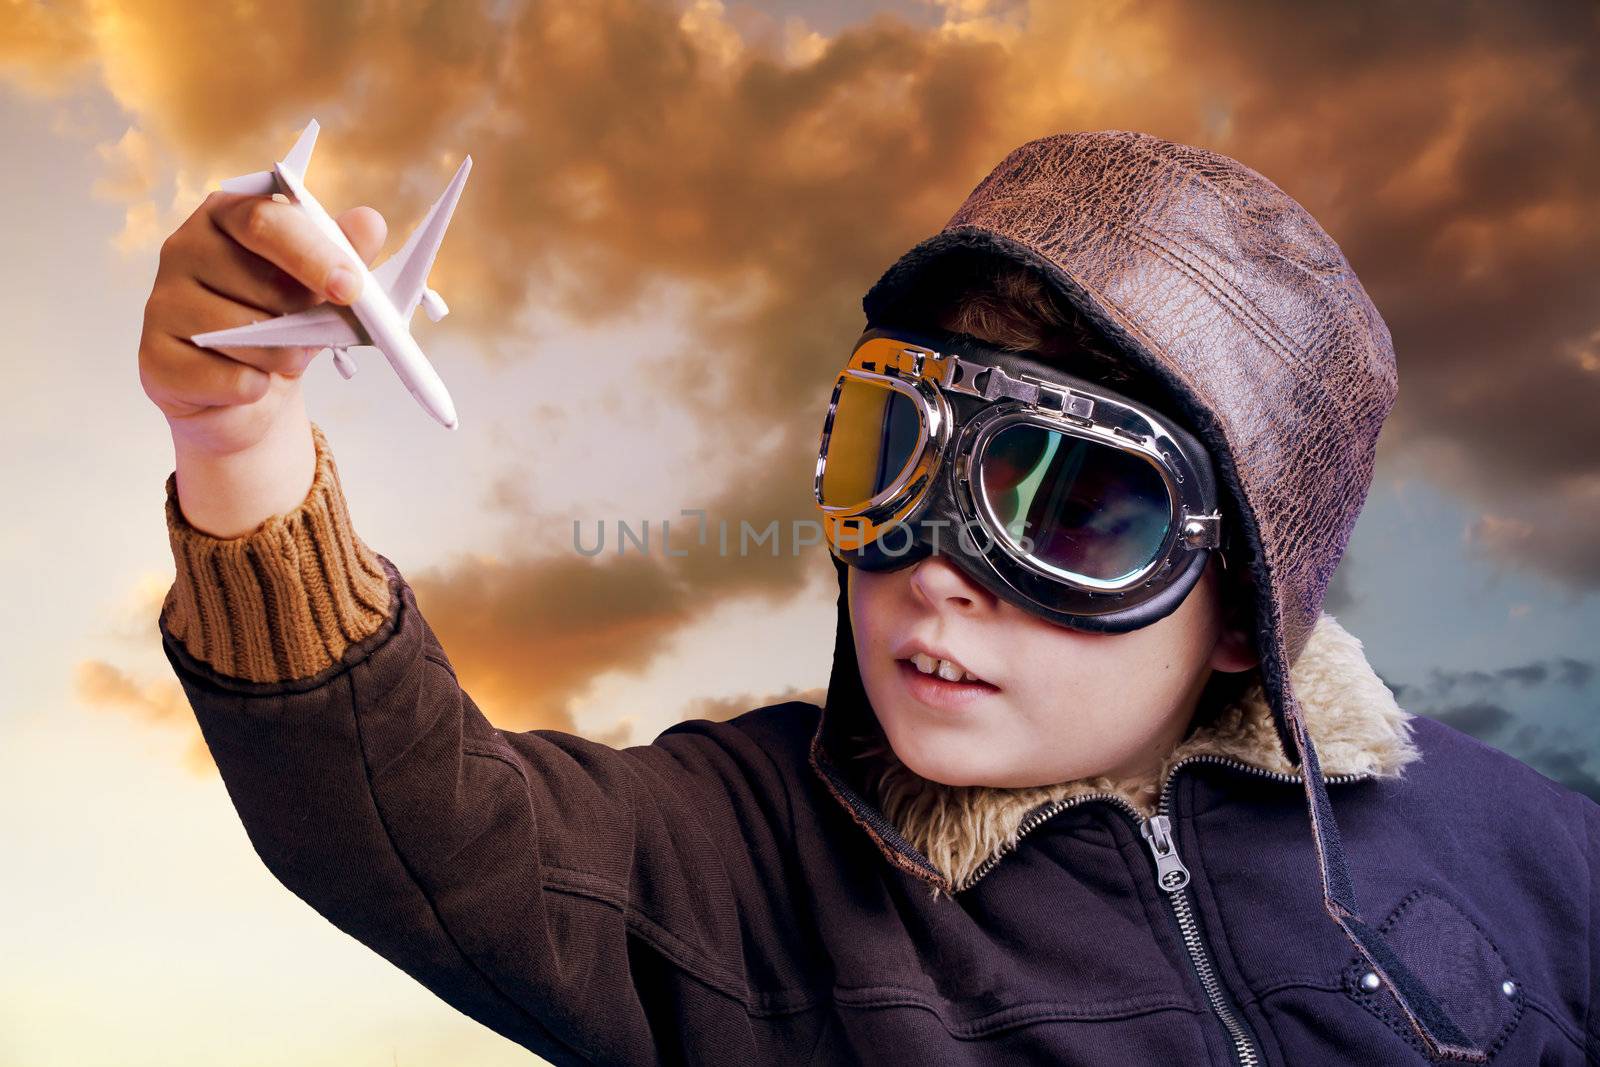 Boy dressed up in pilot outfit at sunset sky